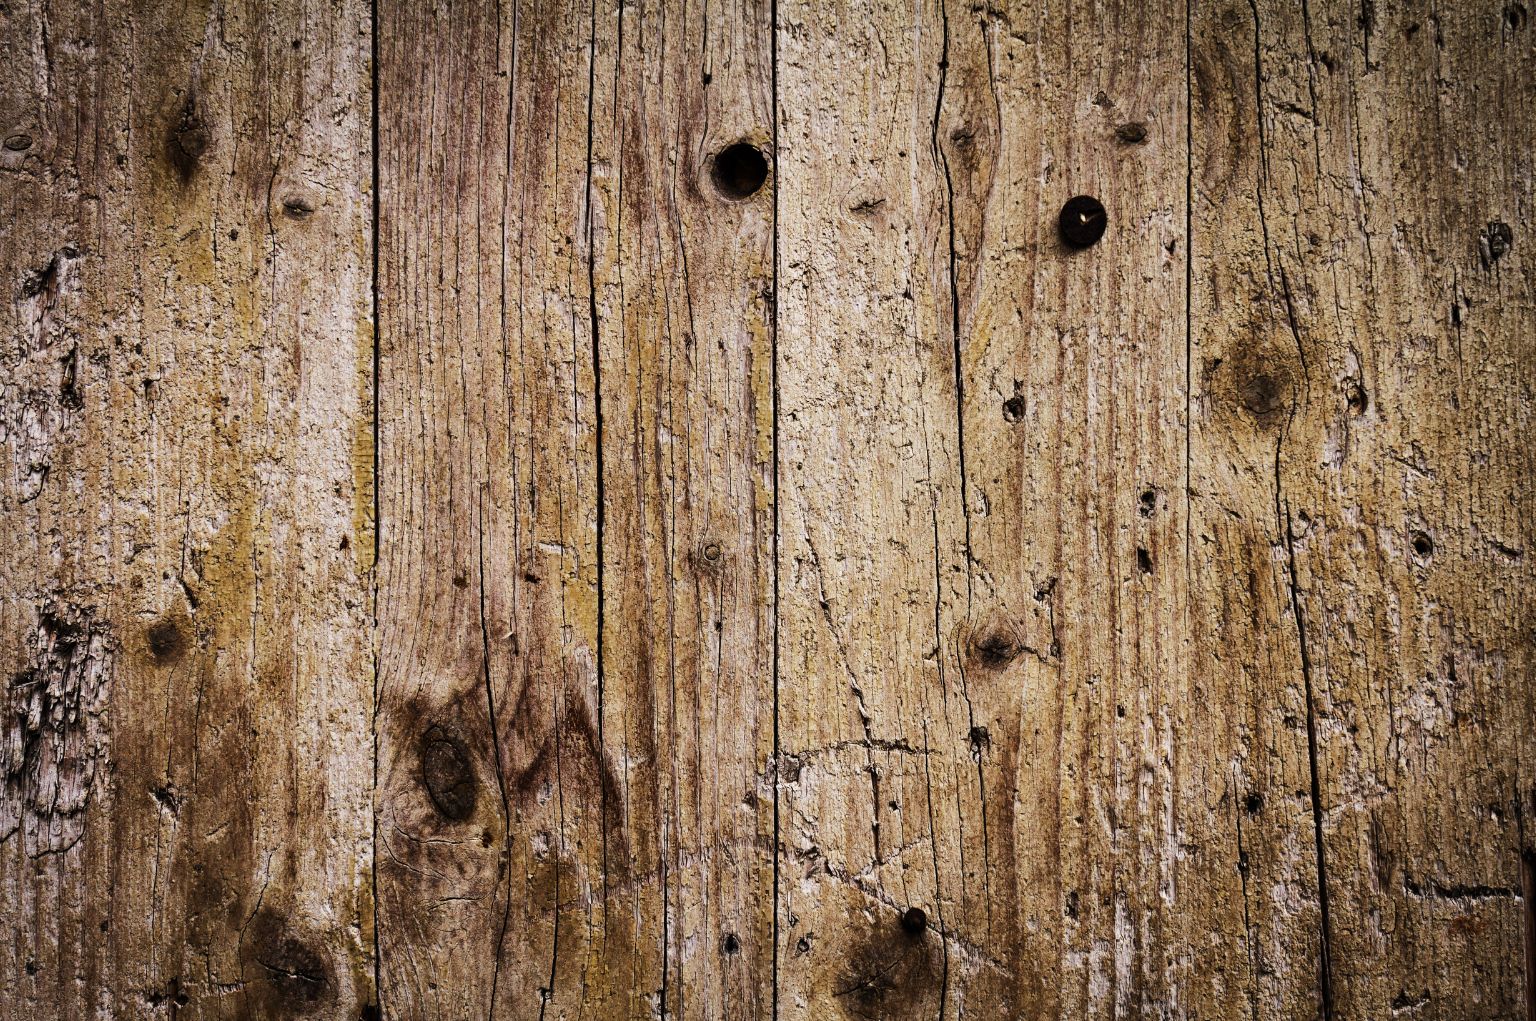 How To Tell If Woodworm Is Active?